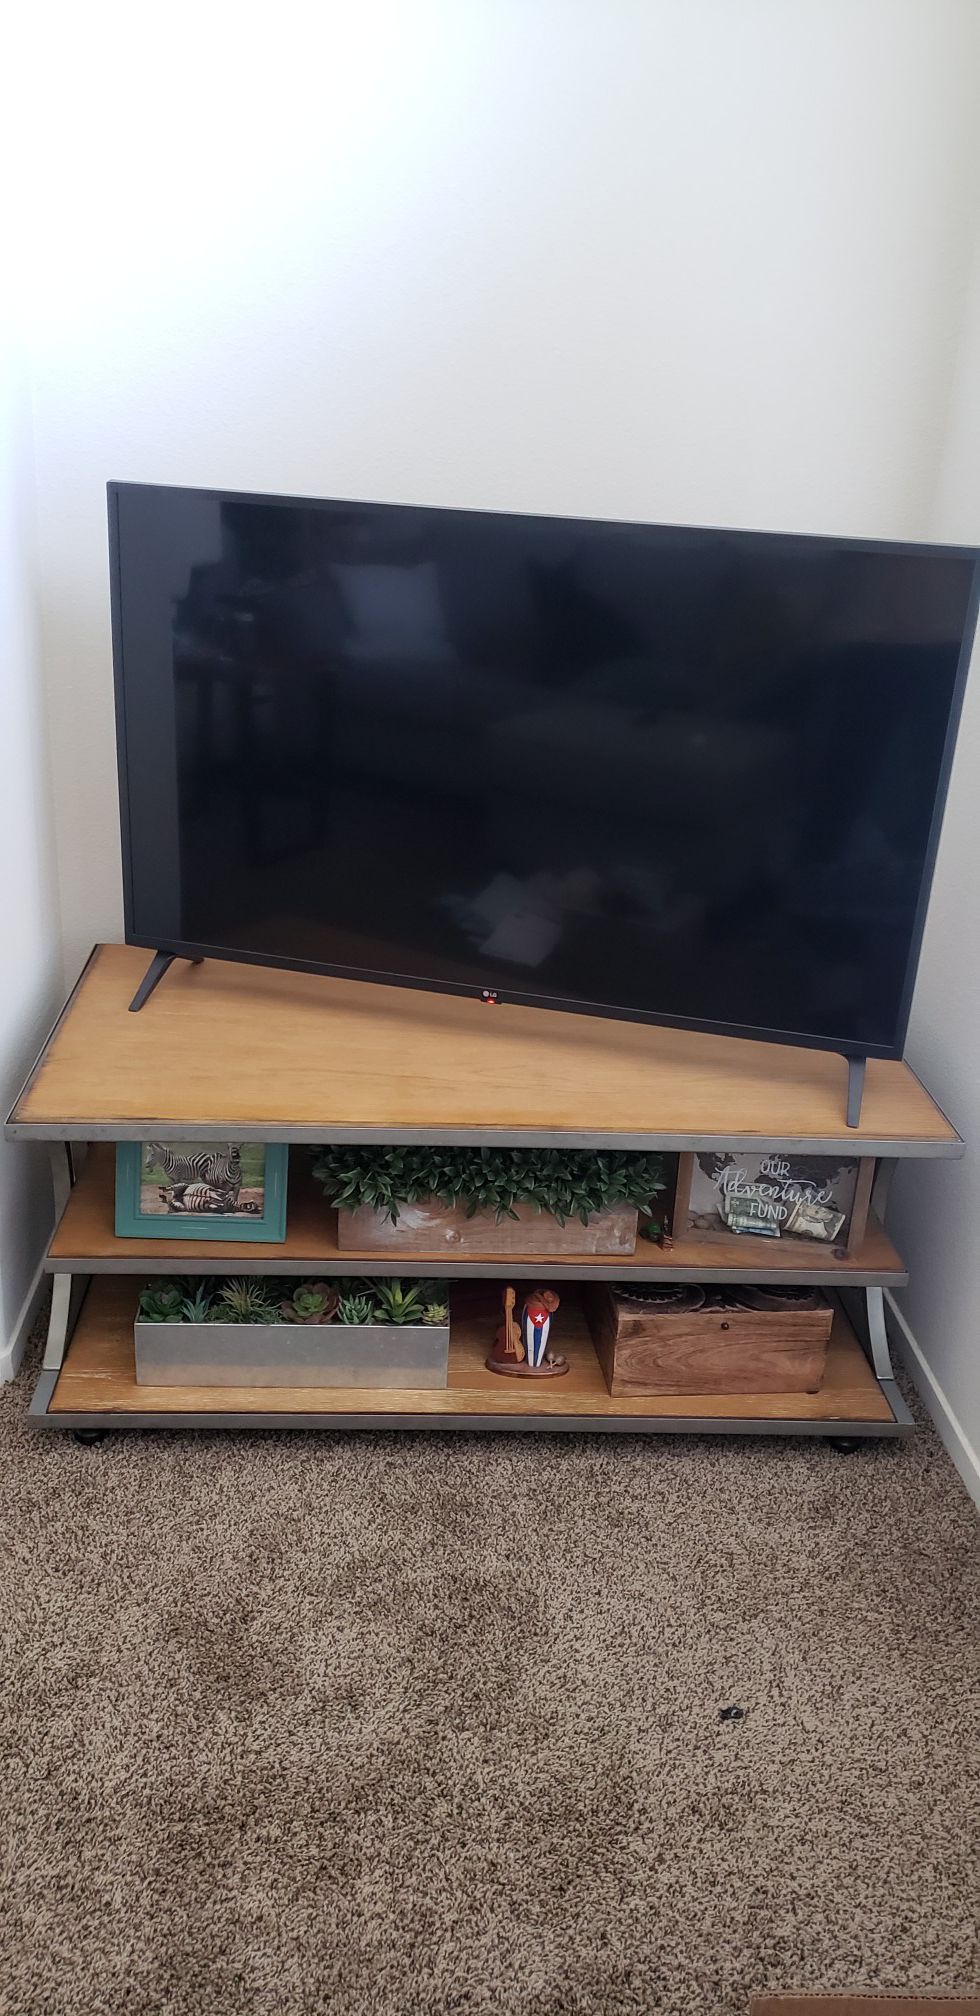 Wood TV stand with two shelves 48" x 25"